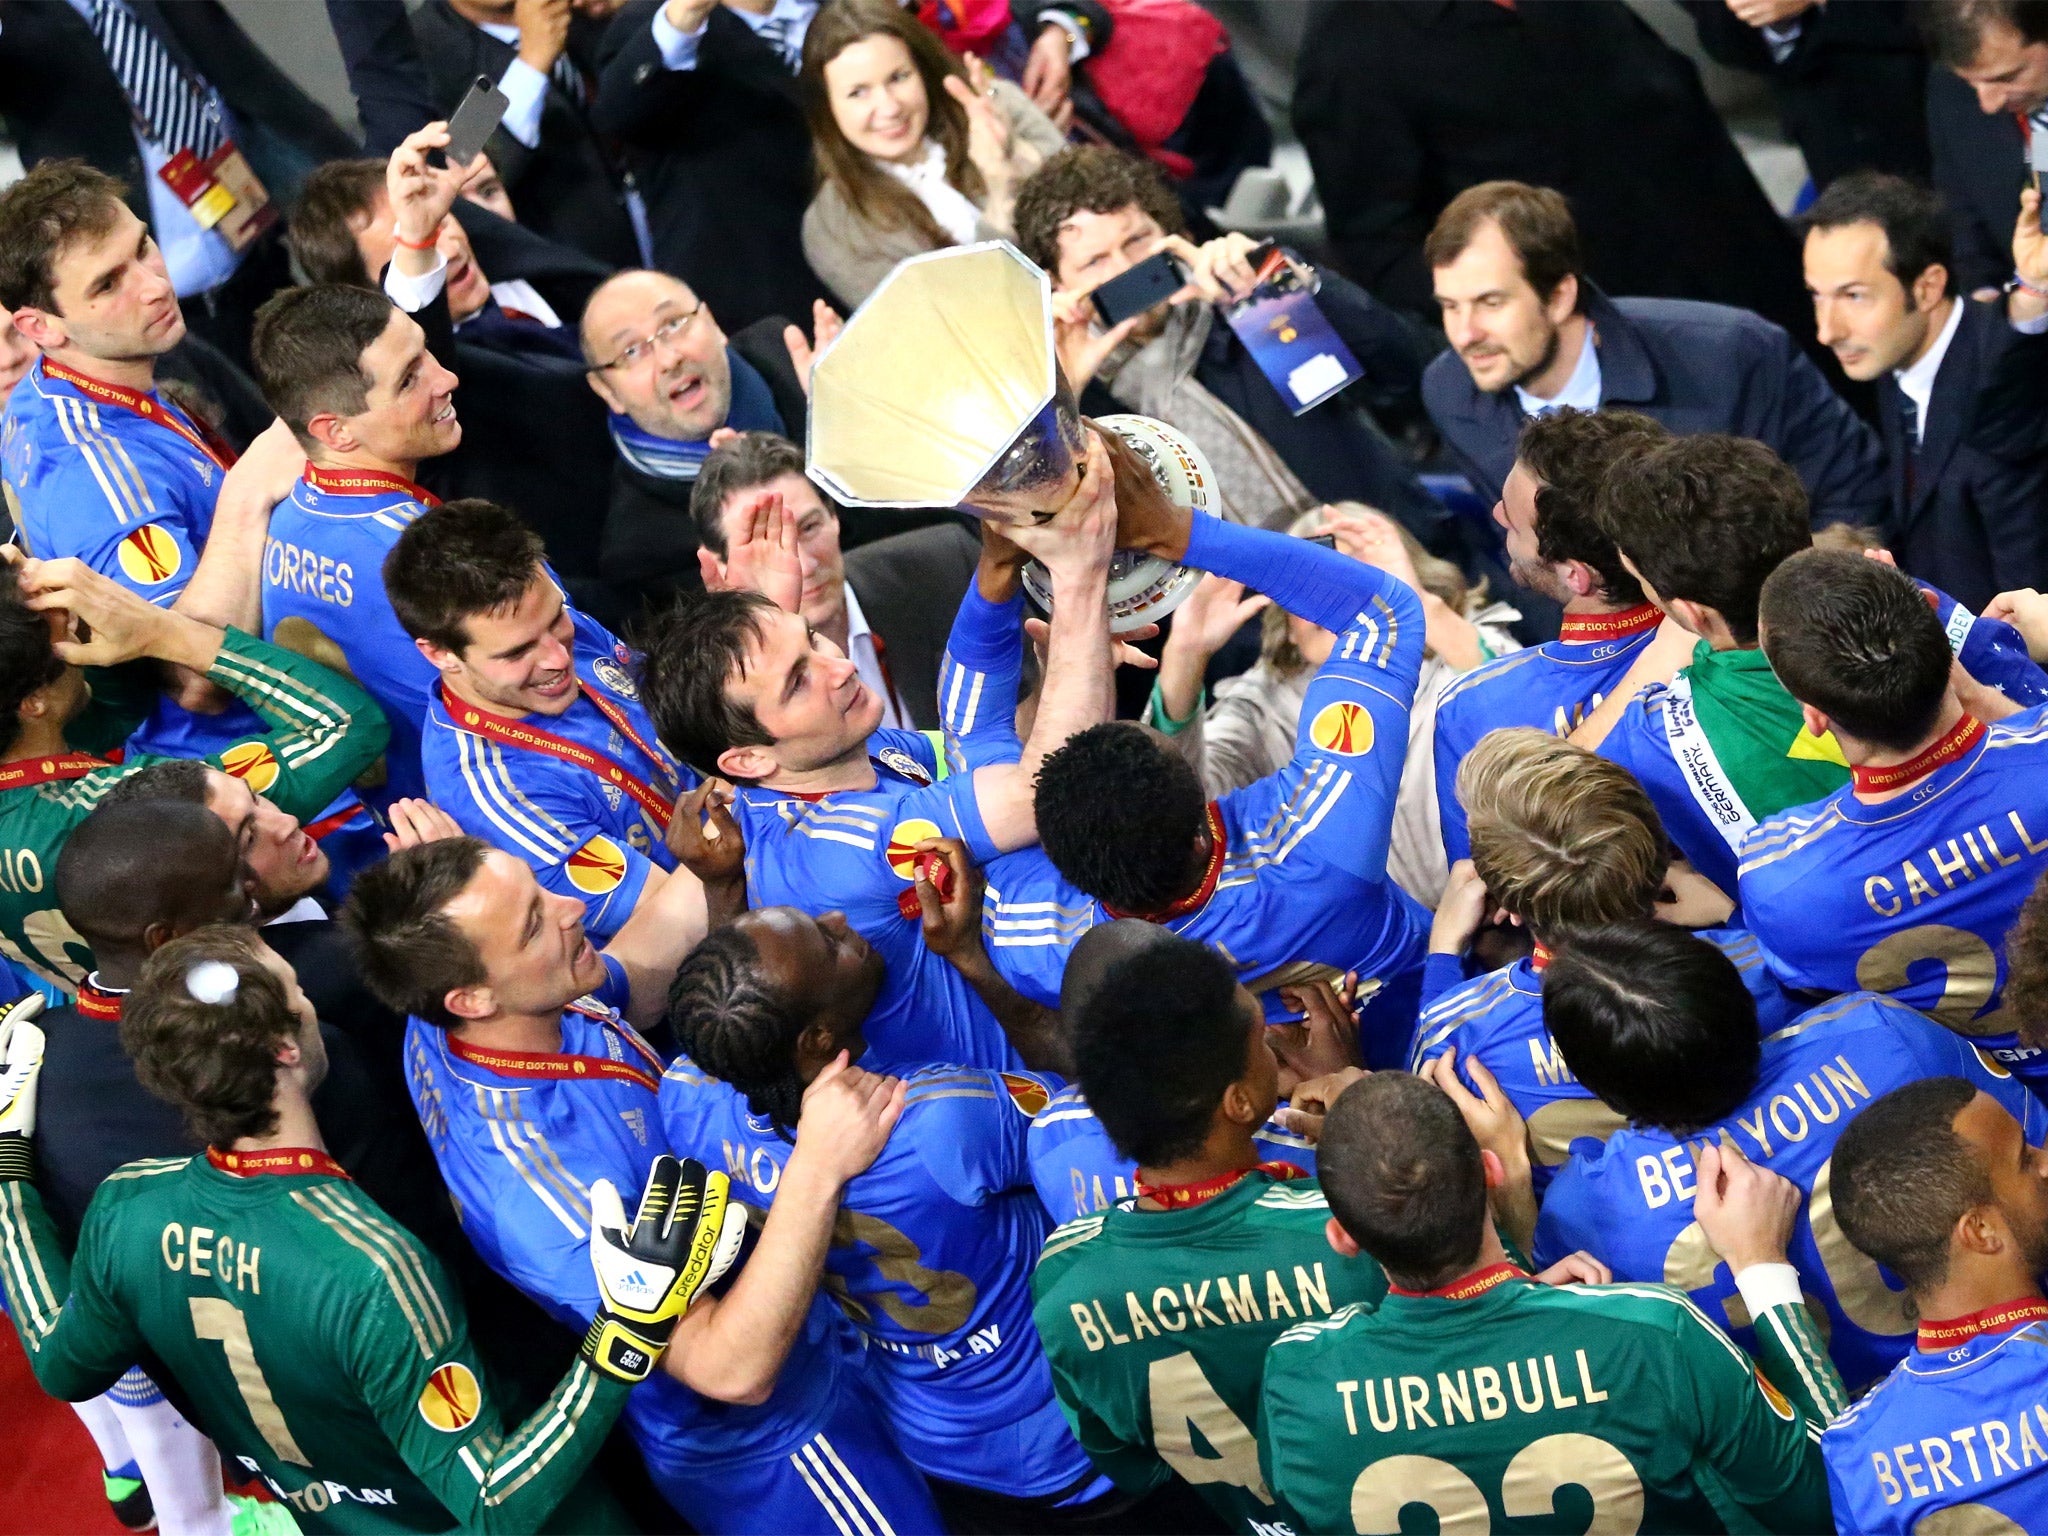 Frank Lampard leads the celebrations as Chelsea lift the Europa League trophy